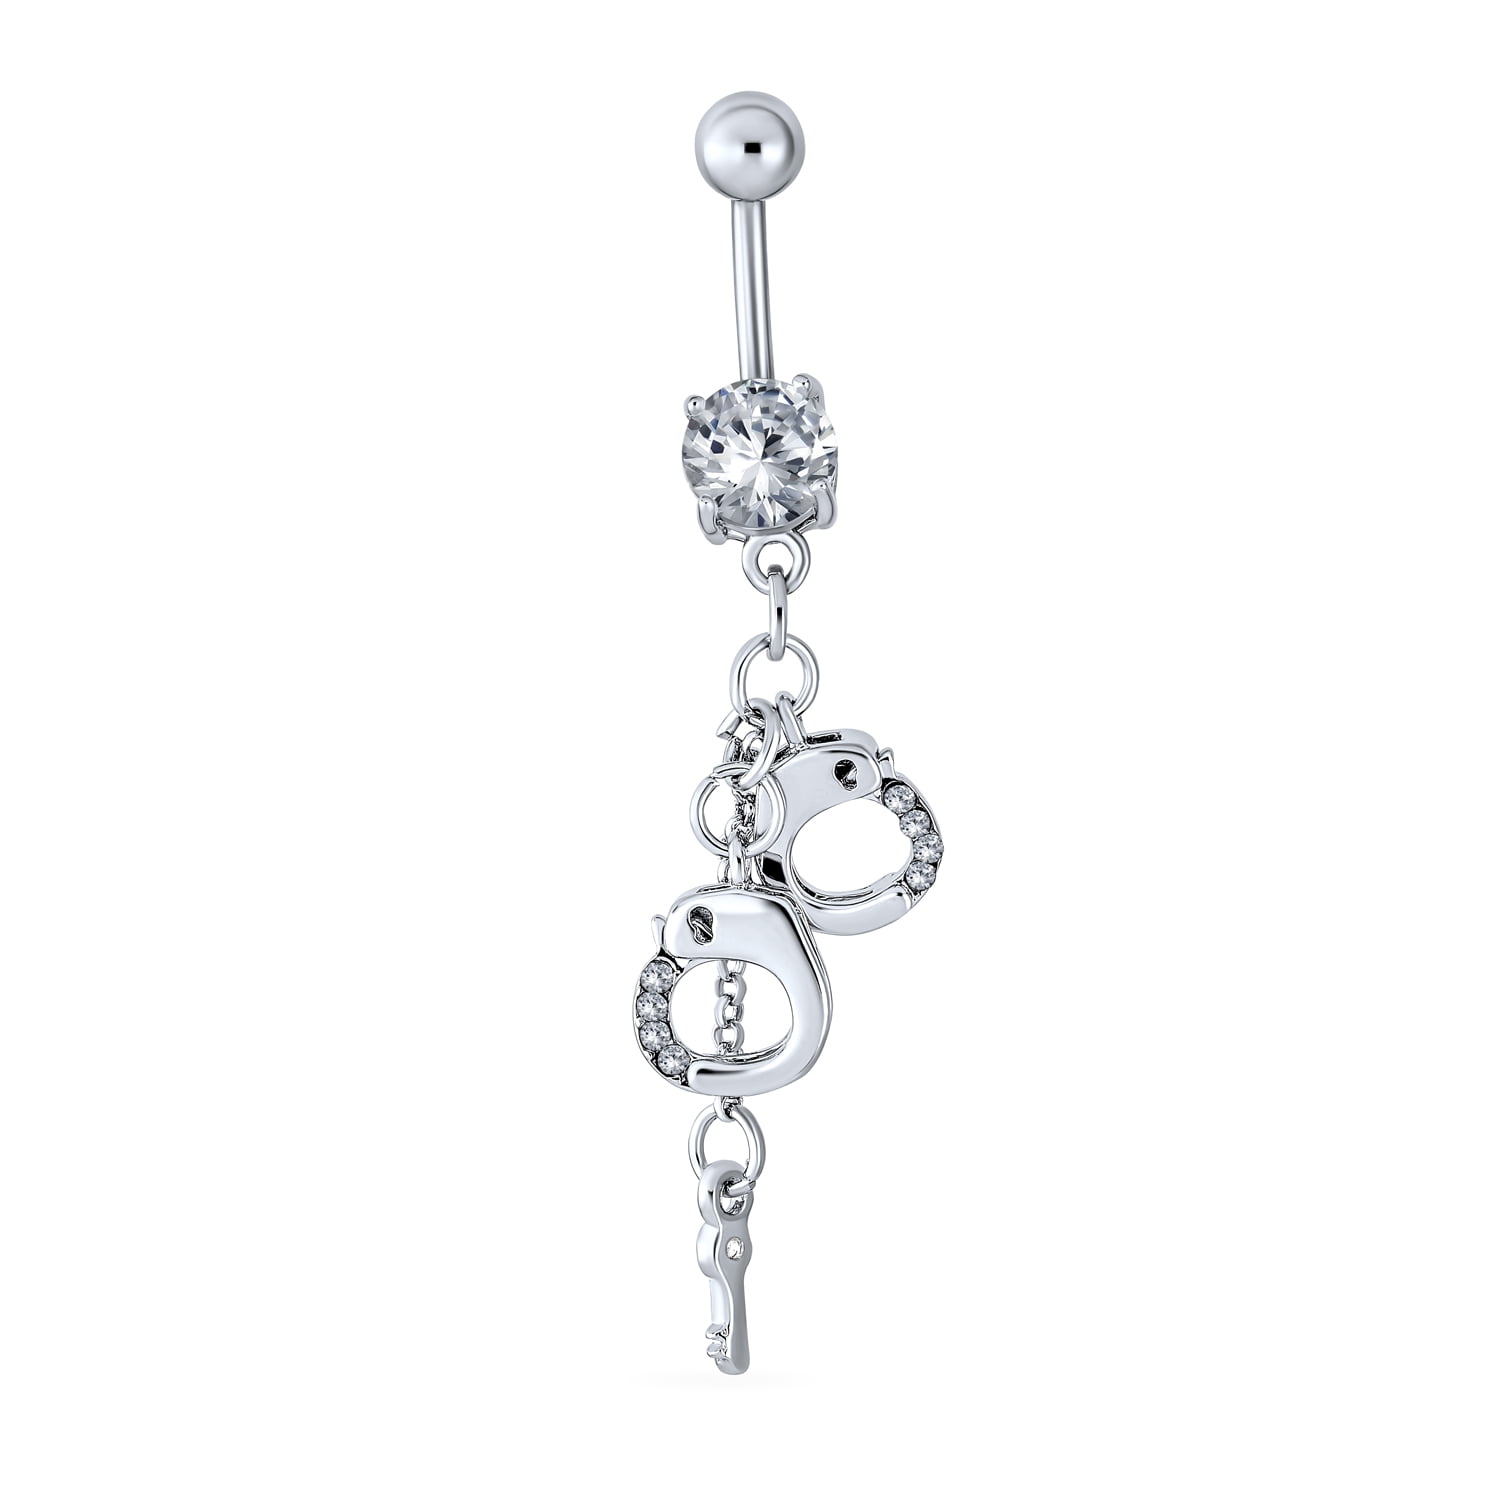 Jewels Fashion Surgical Steel Crystal Bedazzled Ball belly ring Black